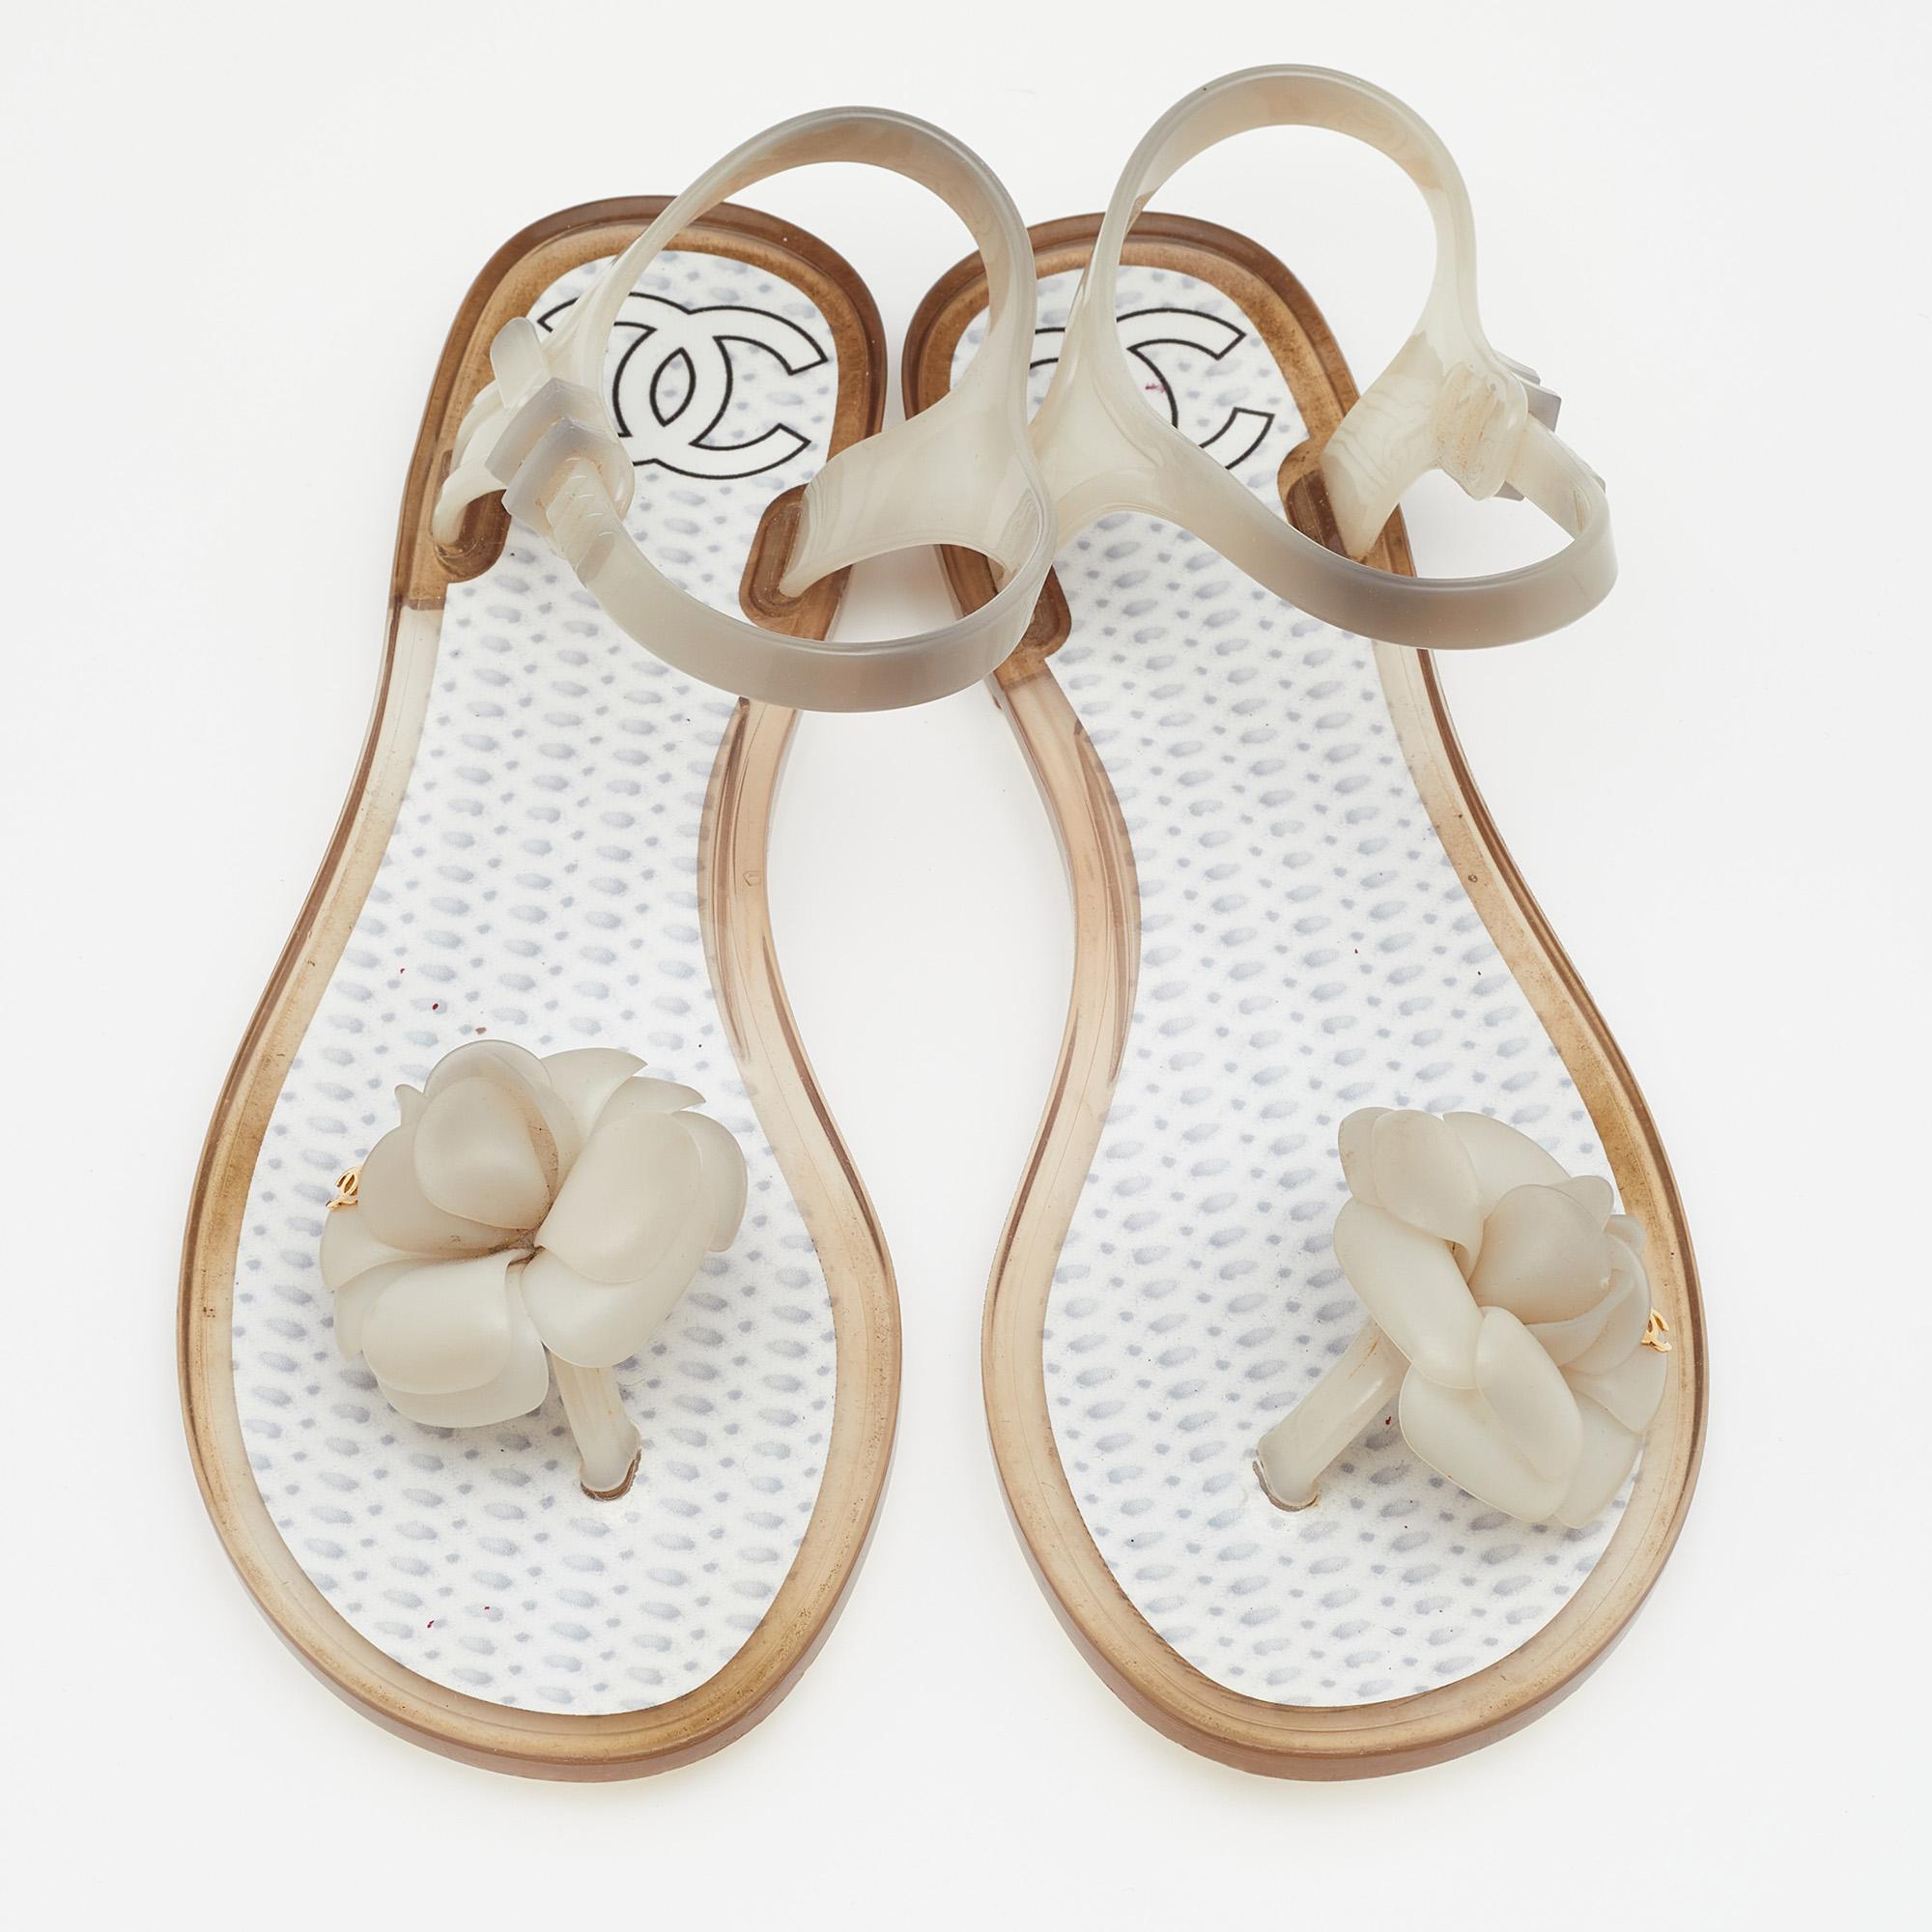 Comfort coupled with fashion creates wonders, and these sandals from Chanel are an example of that. These grey flat sandals are crafted from jelly into a thong design. They flaunt the signature Camellia flower with the CC logo on the uppers.

